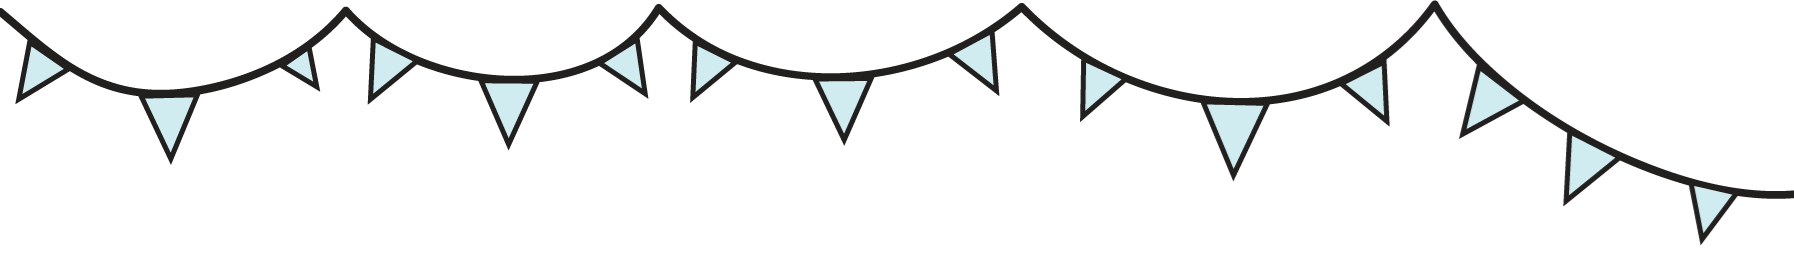 Icons - Bunting Flags Banner 2 - Black Blue